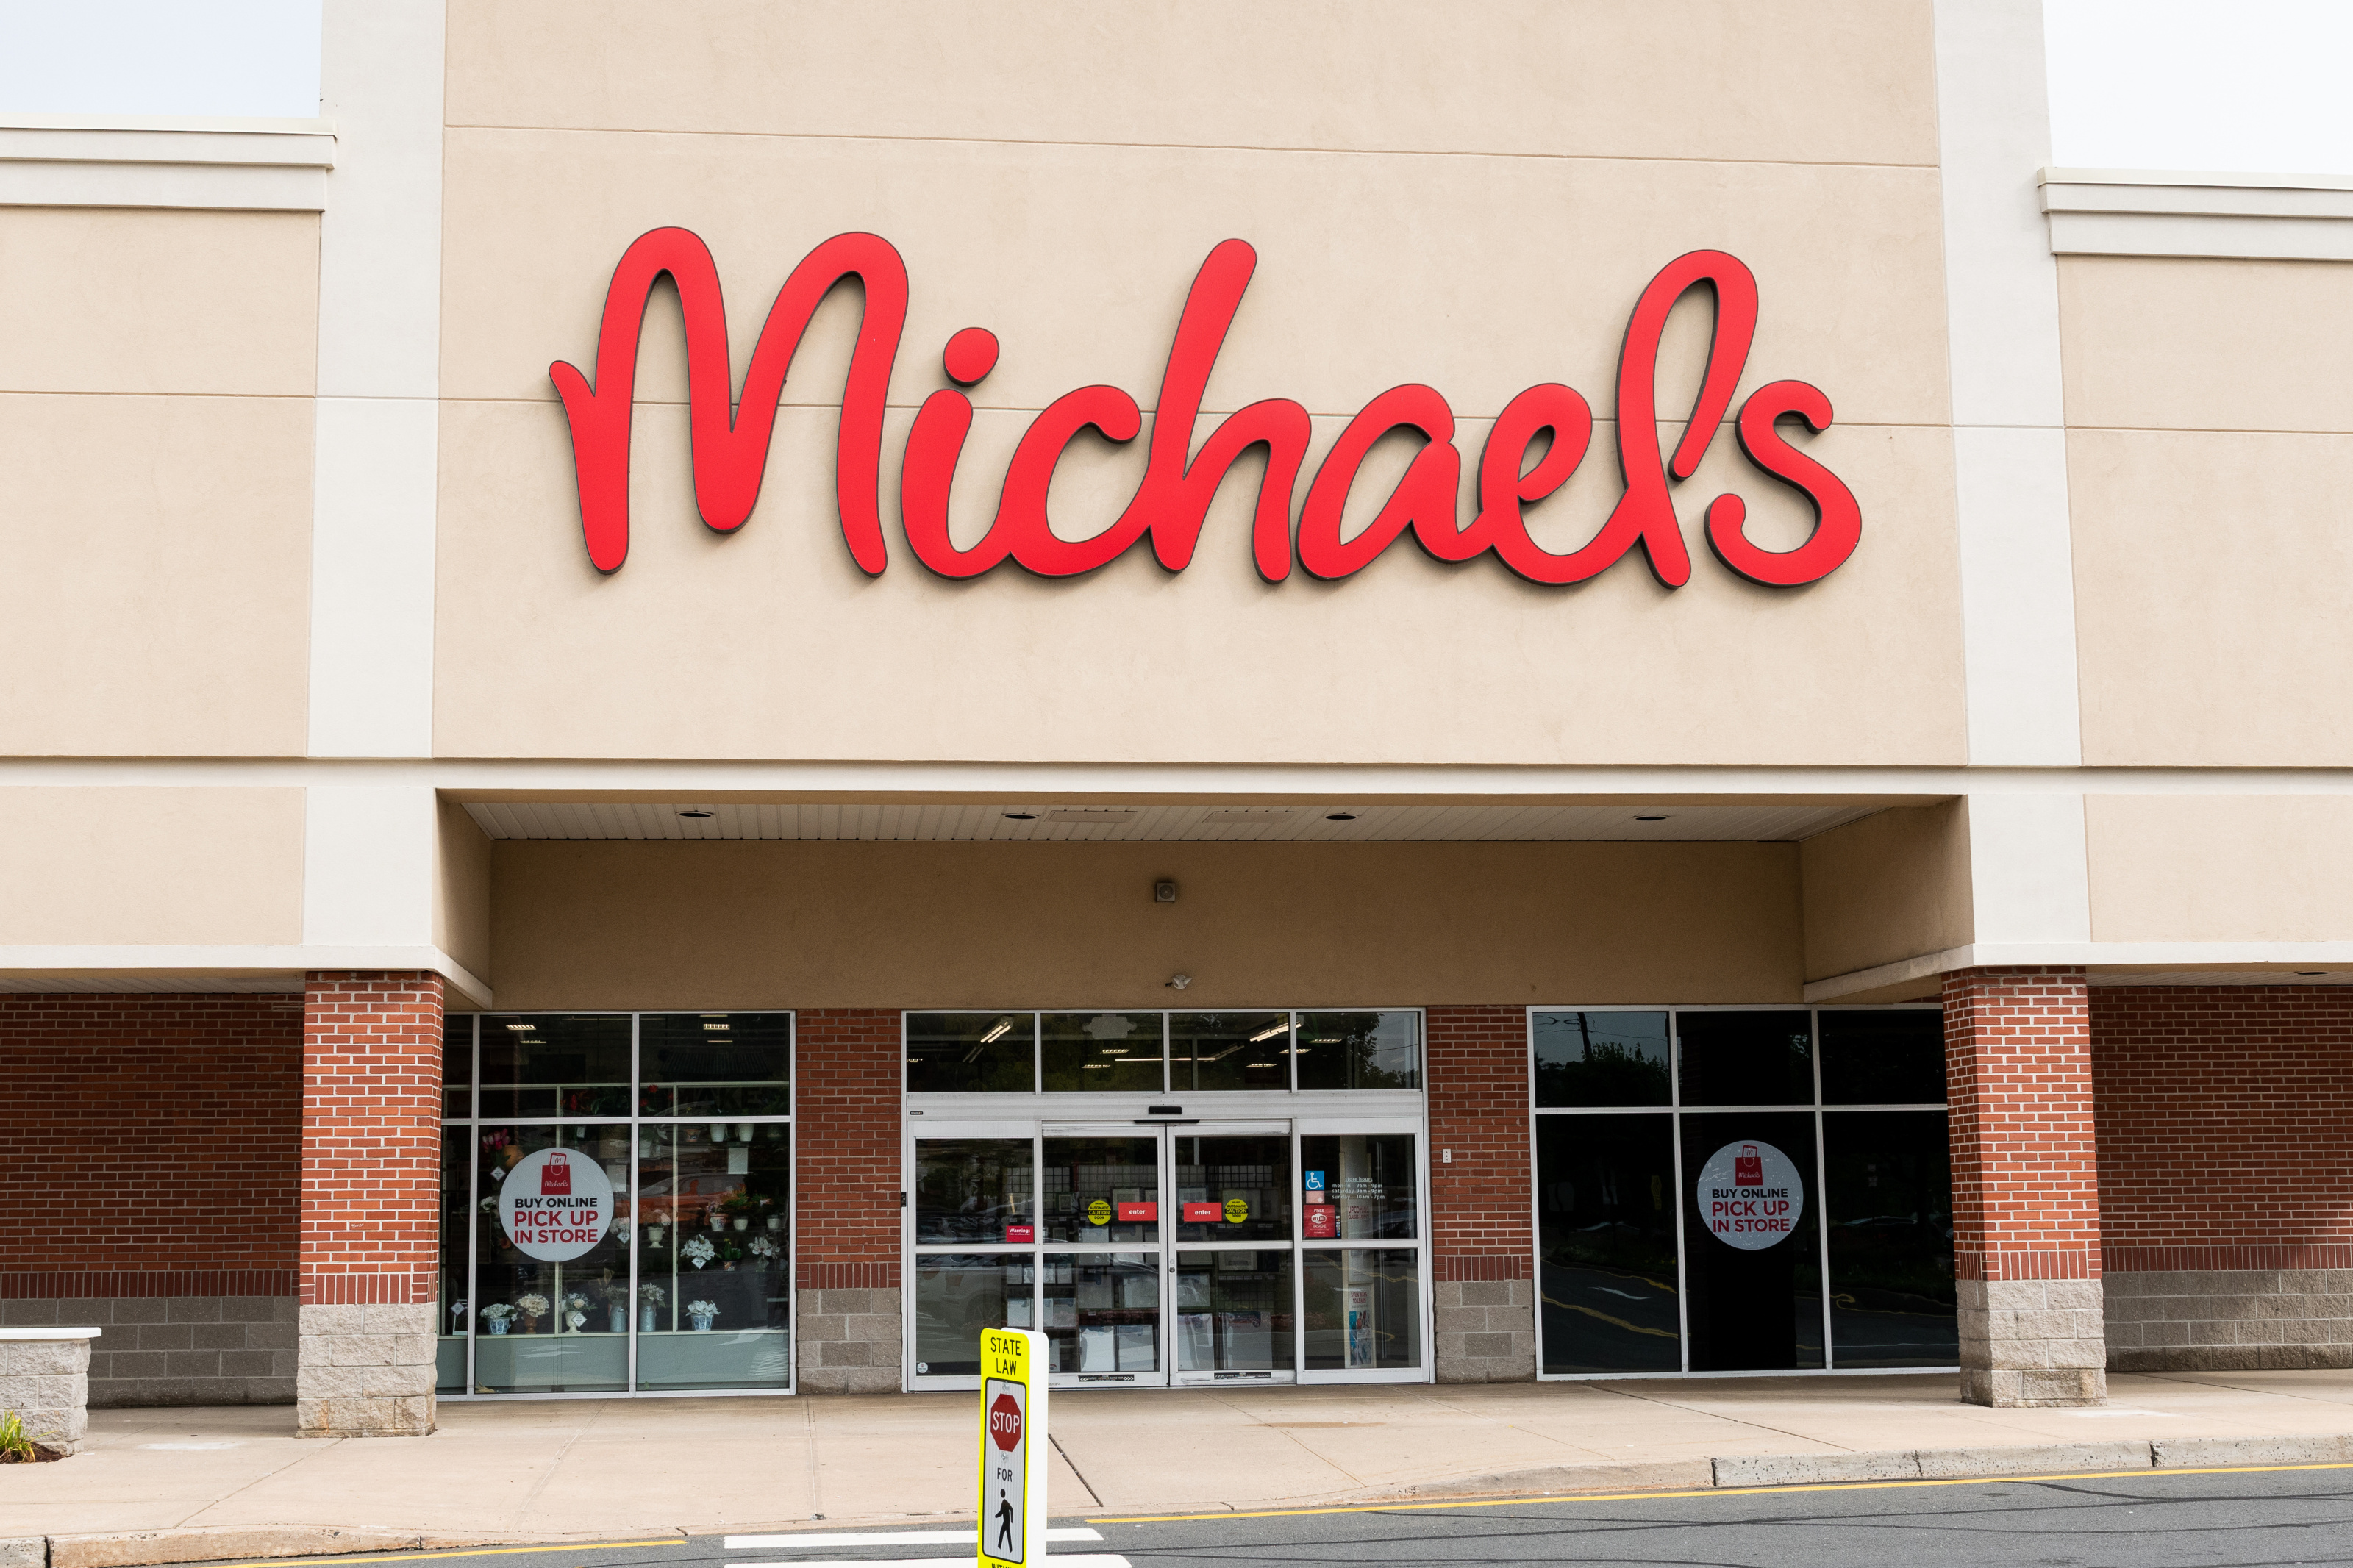 Michaels Hours Is it Open Today?